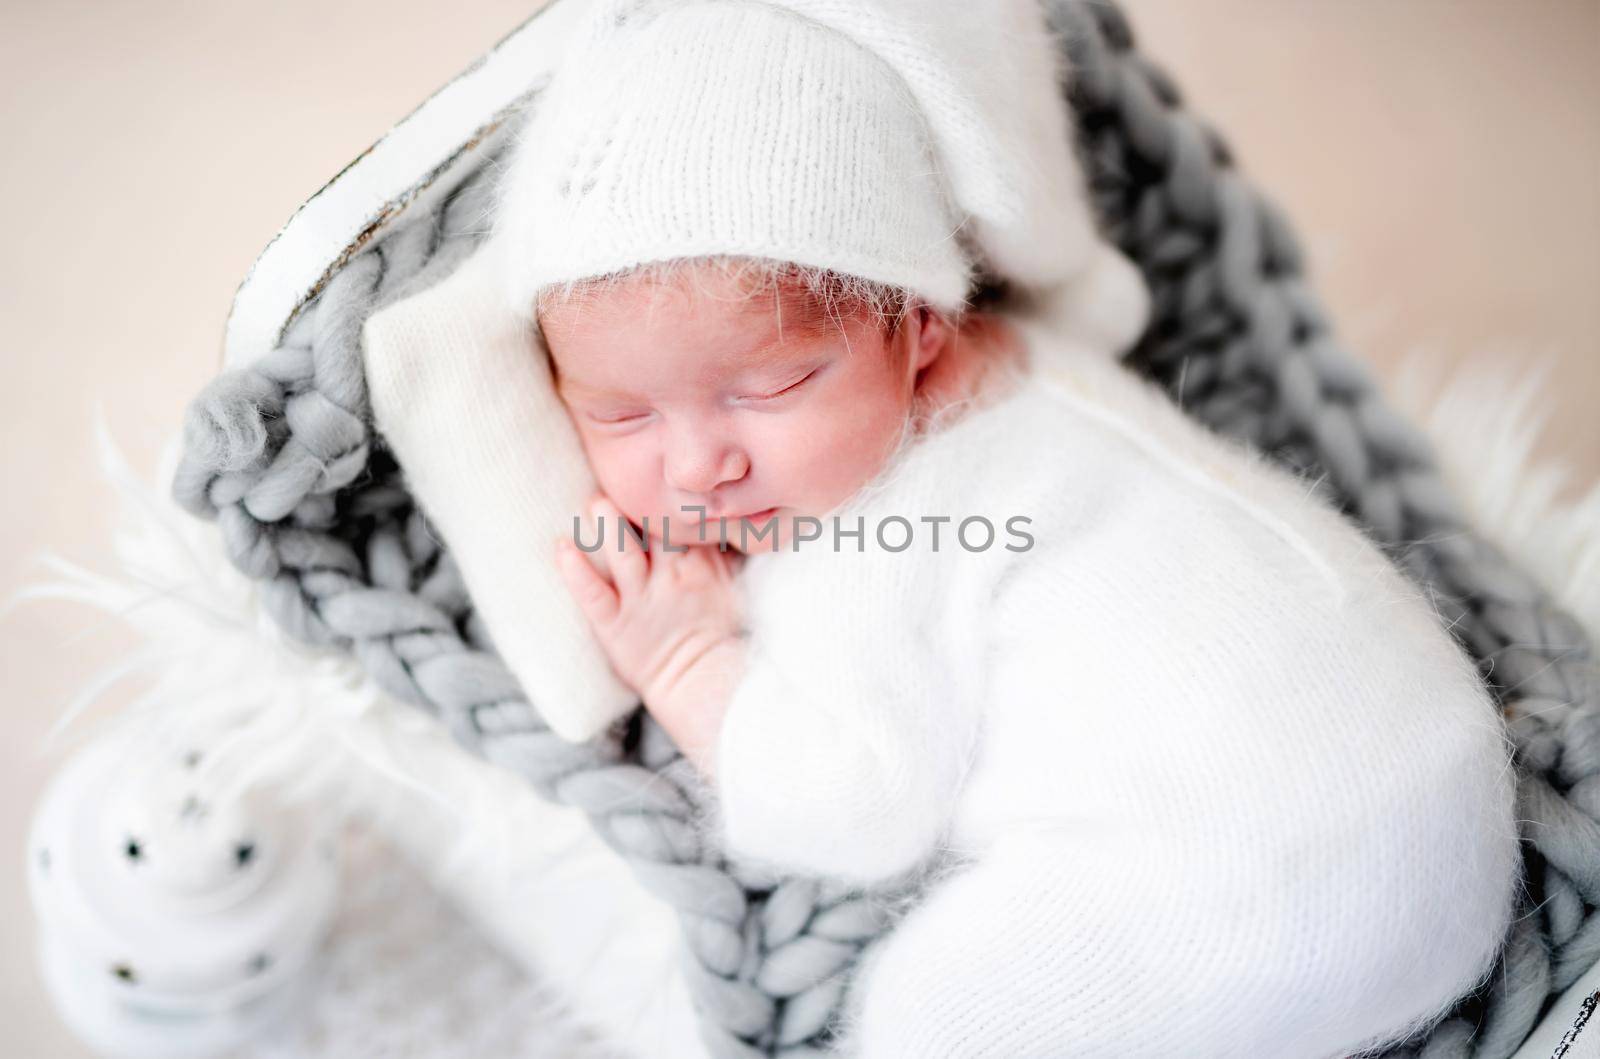 Cute newborn in white suit and hat sleeping on tiny bed